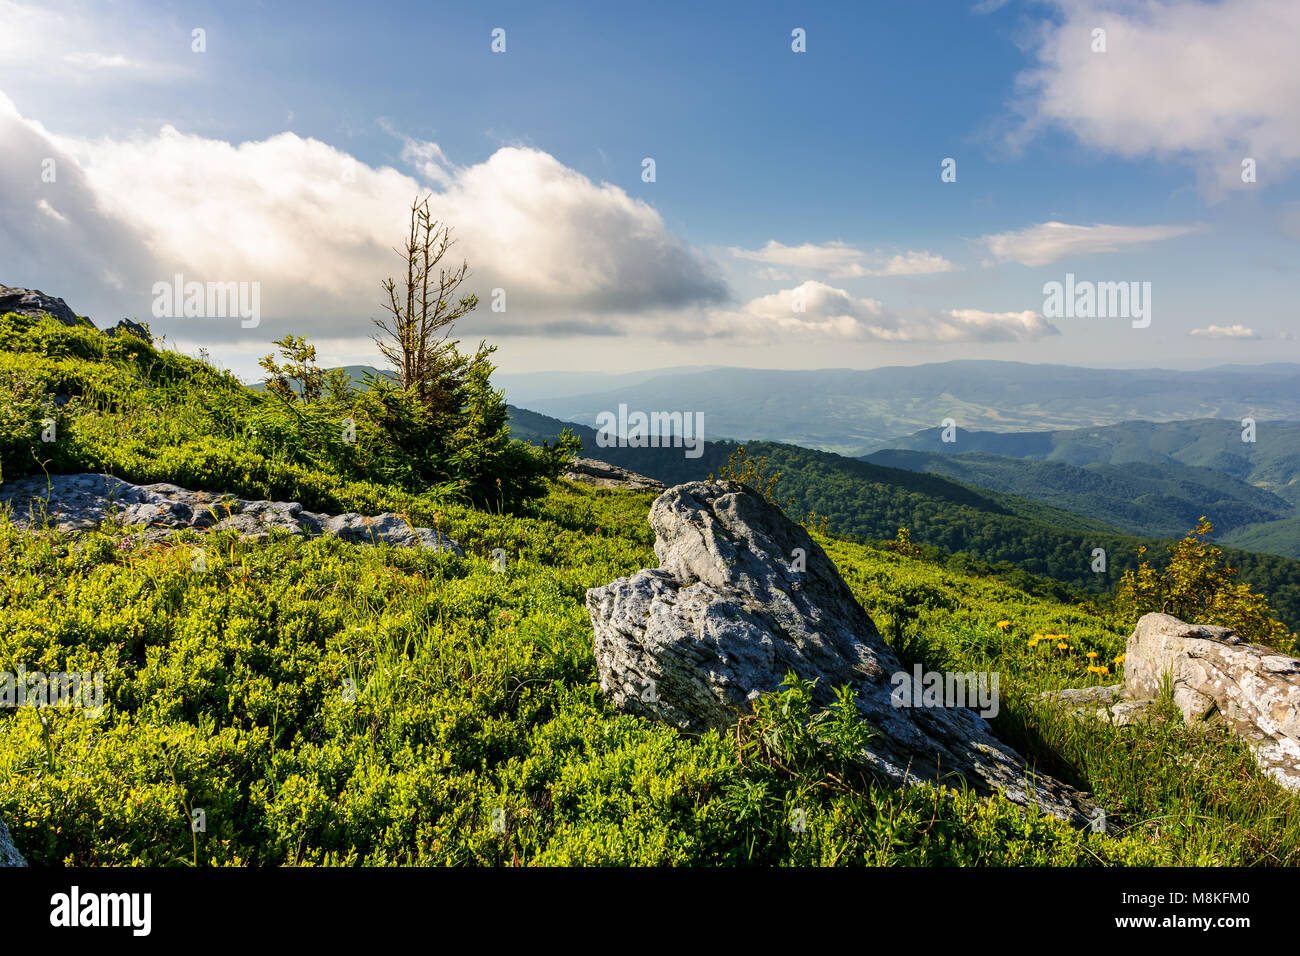 small spruce tree at the top of a hill. beautiful landscape with boulders on grassy hillside on a cloudy summer day Stock Photo